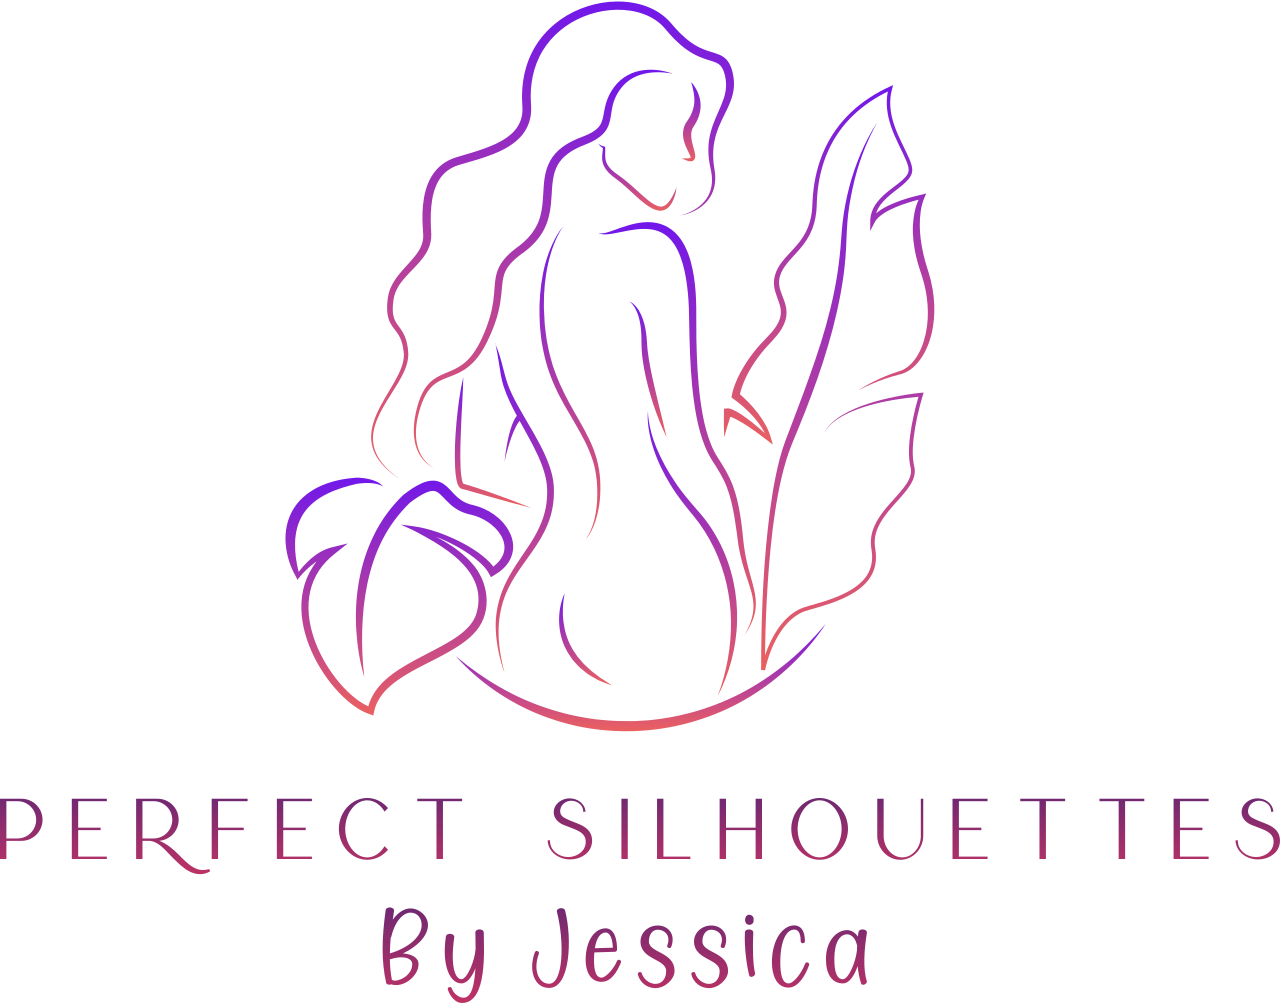 Perfect silhouettes's web page